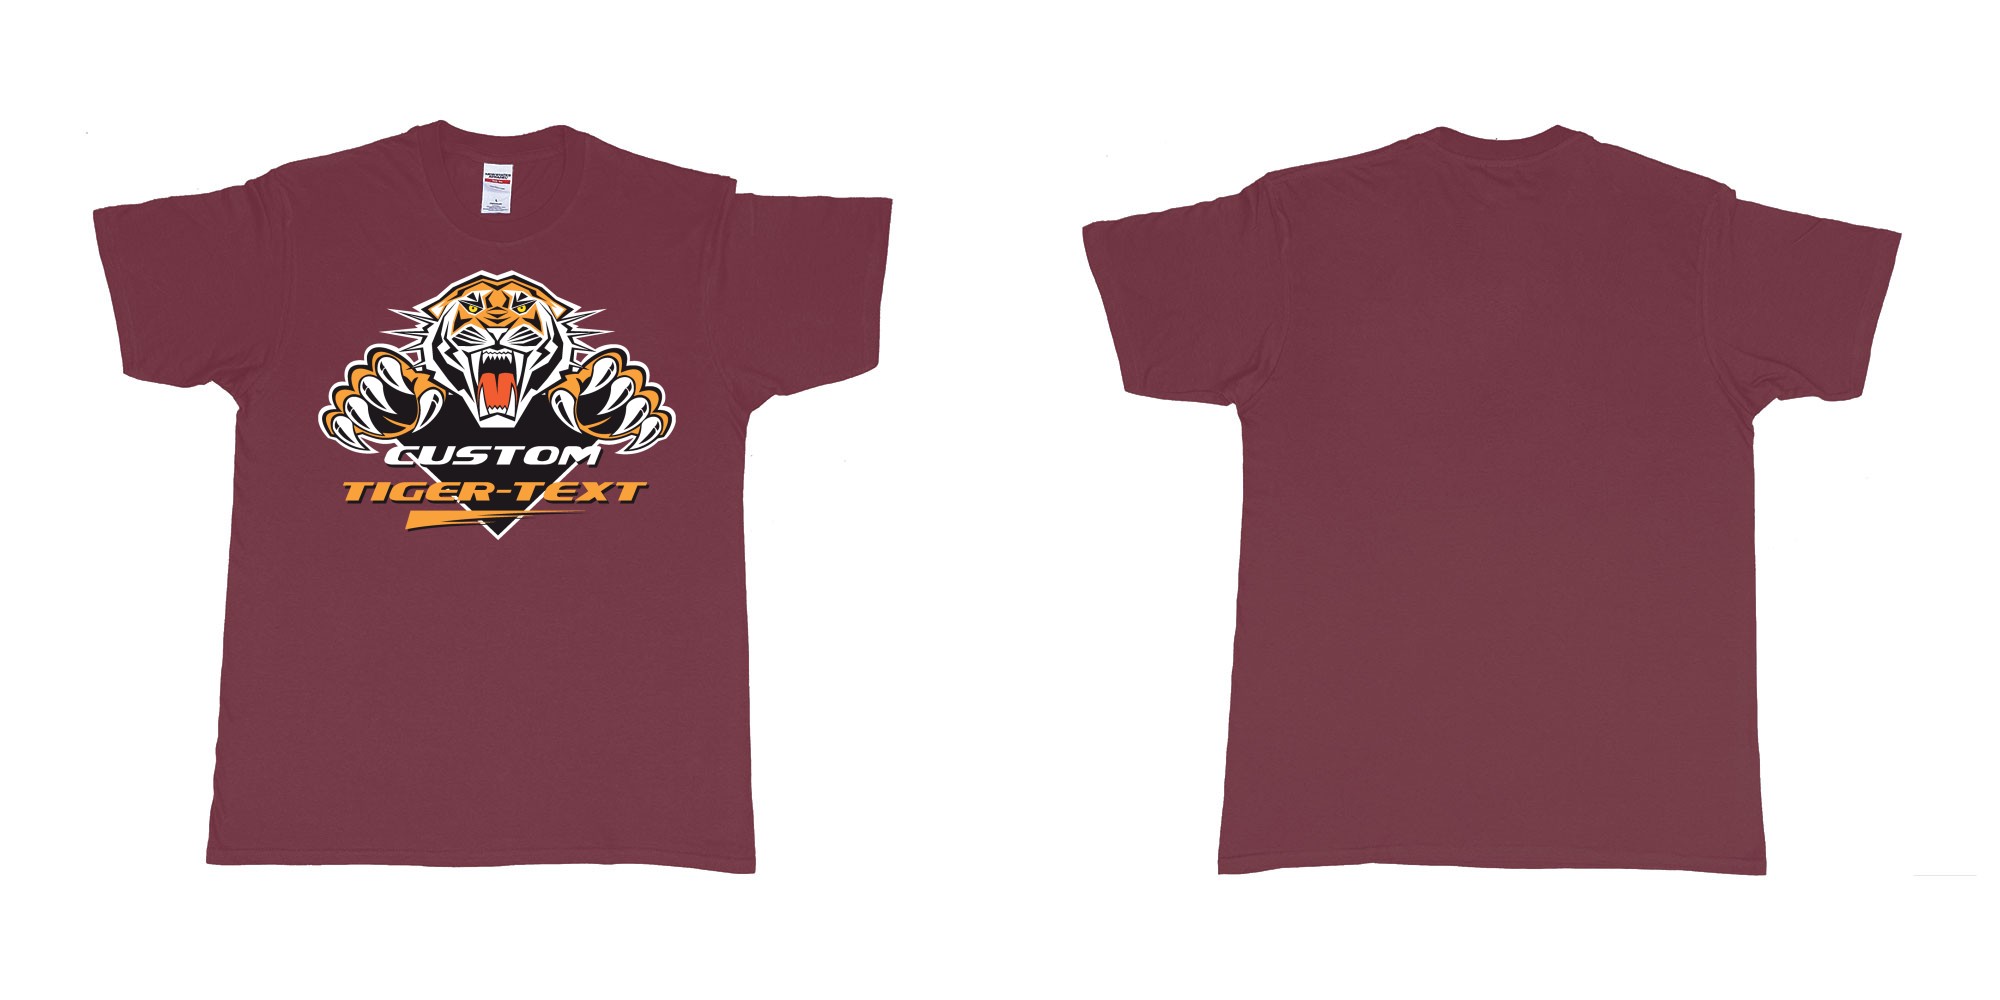 Custom tshirt design the wests tigers sydney national rugby league custom tshirt print in fabric color marron choice your own text made in Bali by The Pirate Way